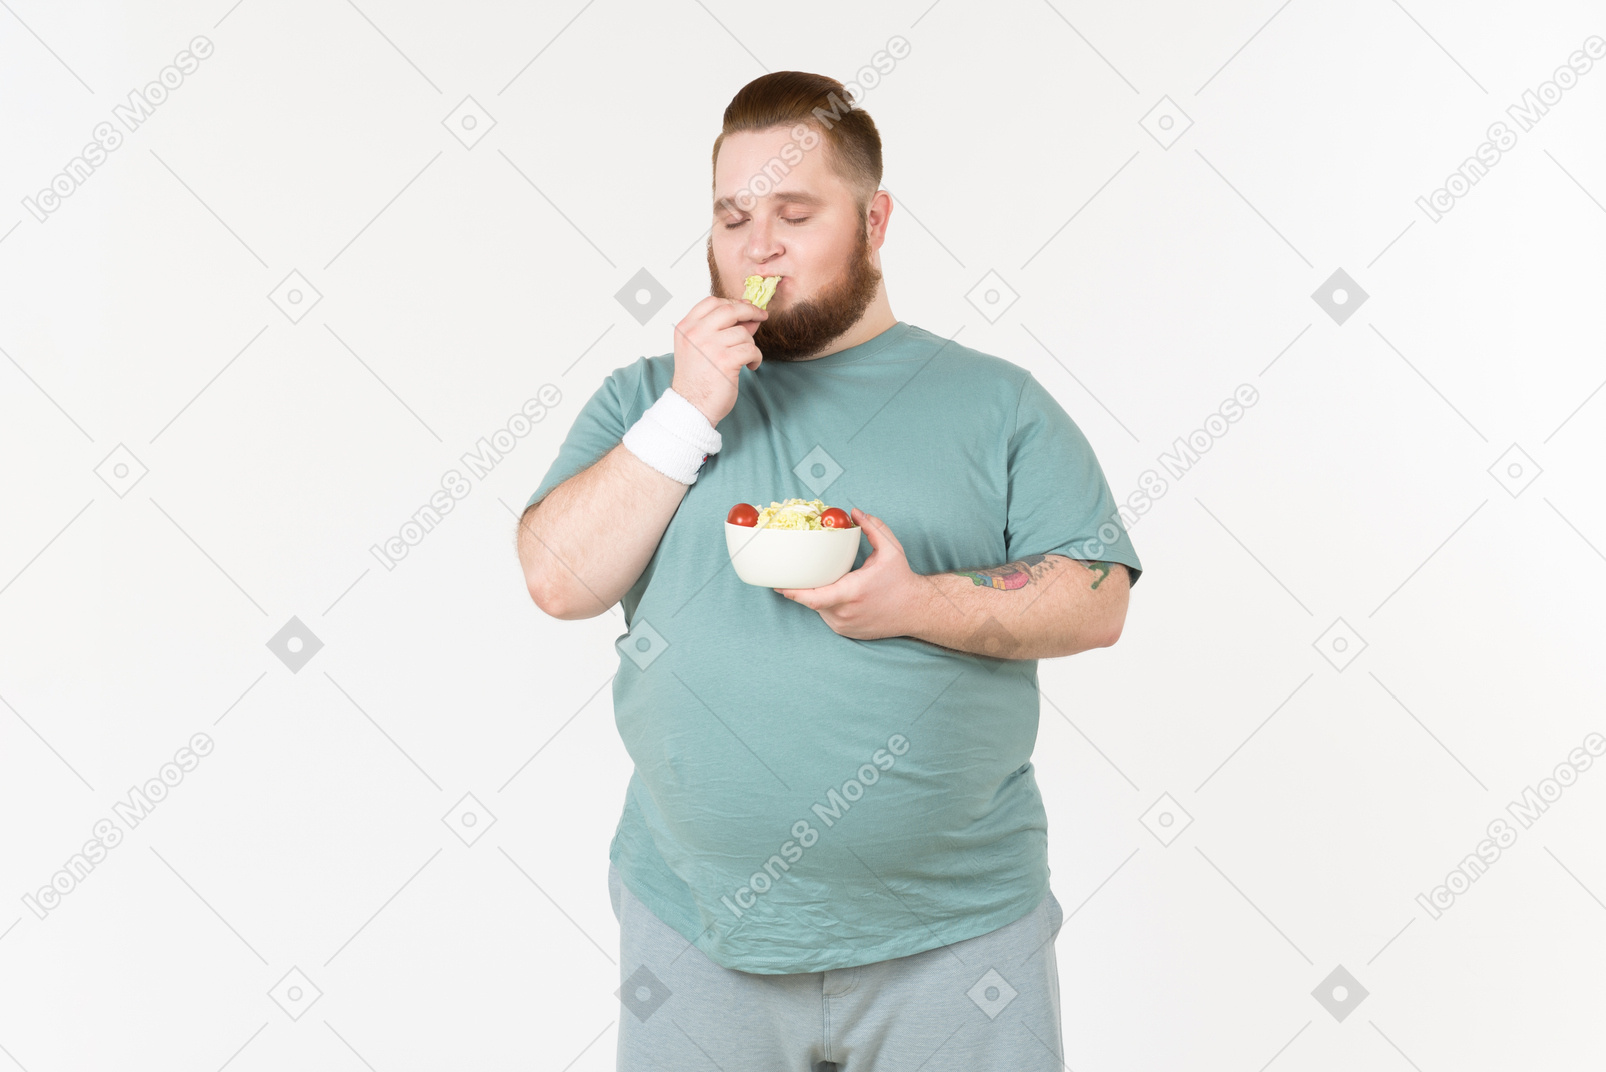 Big guy in sportswear eating salad leaf he's picked from the plate